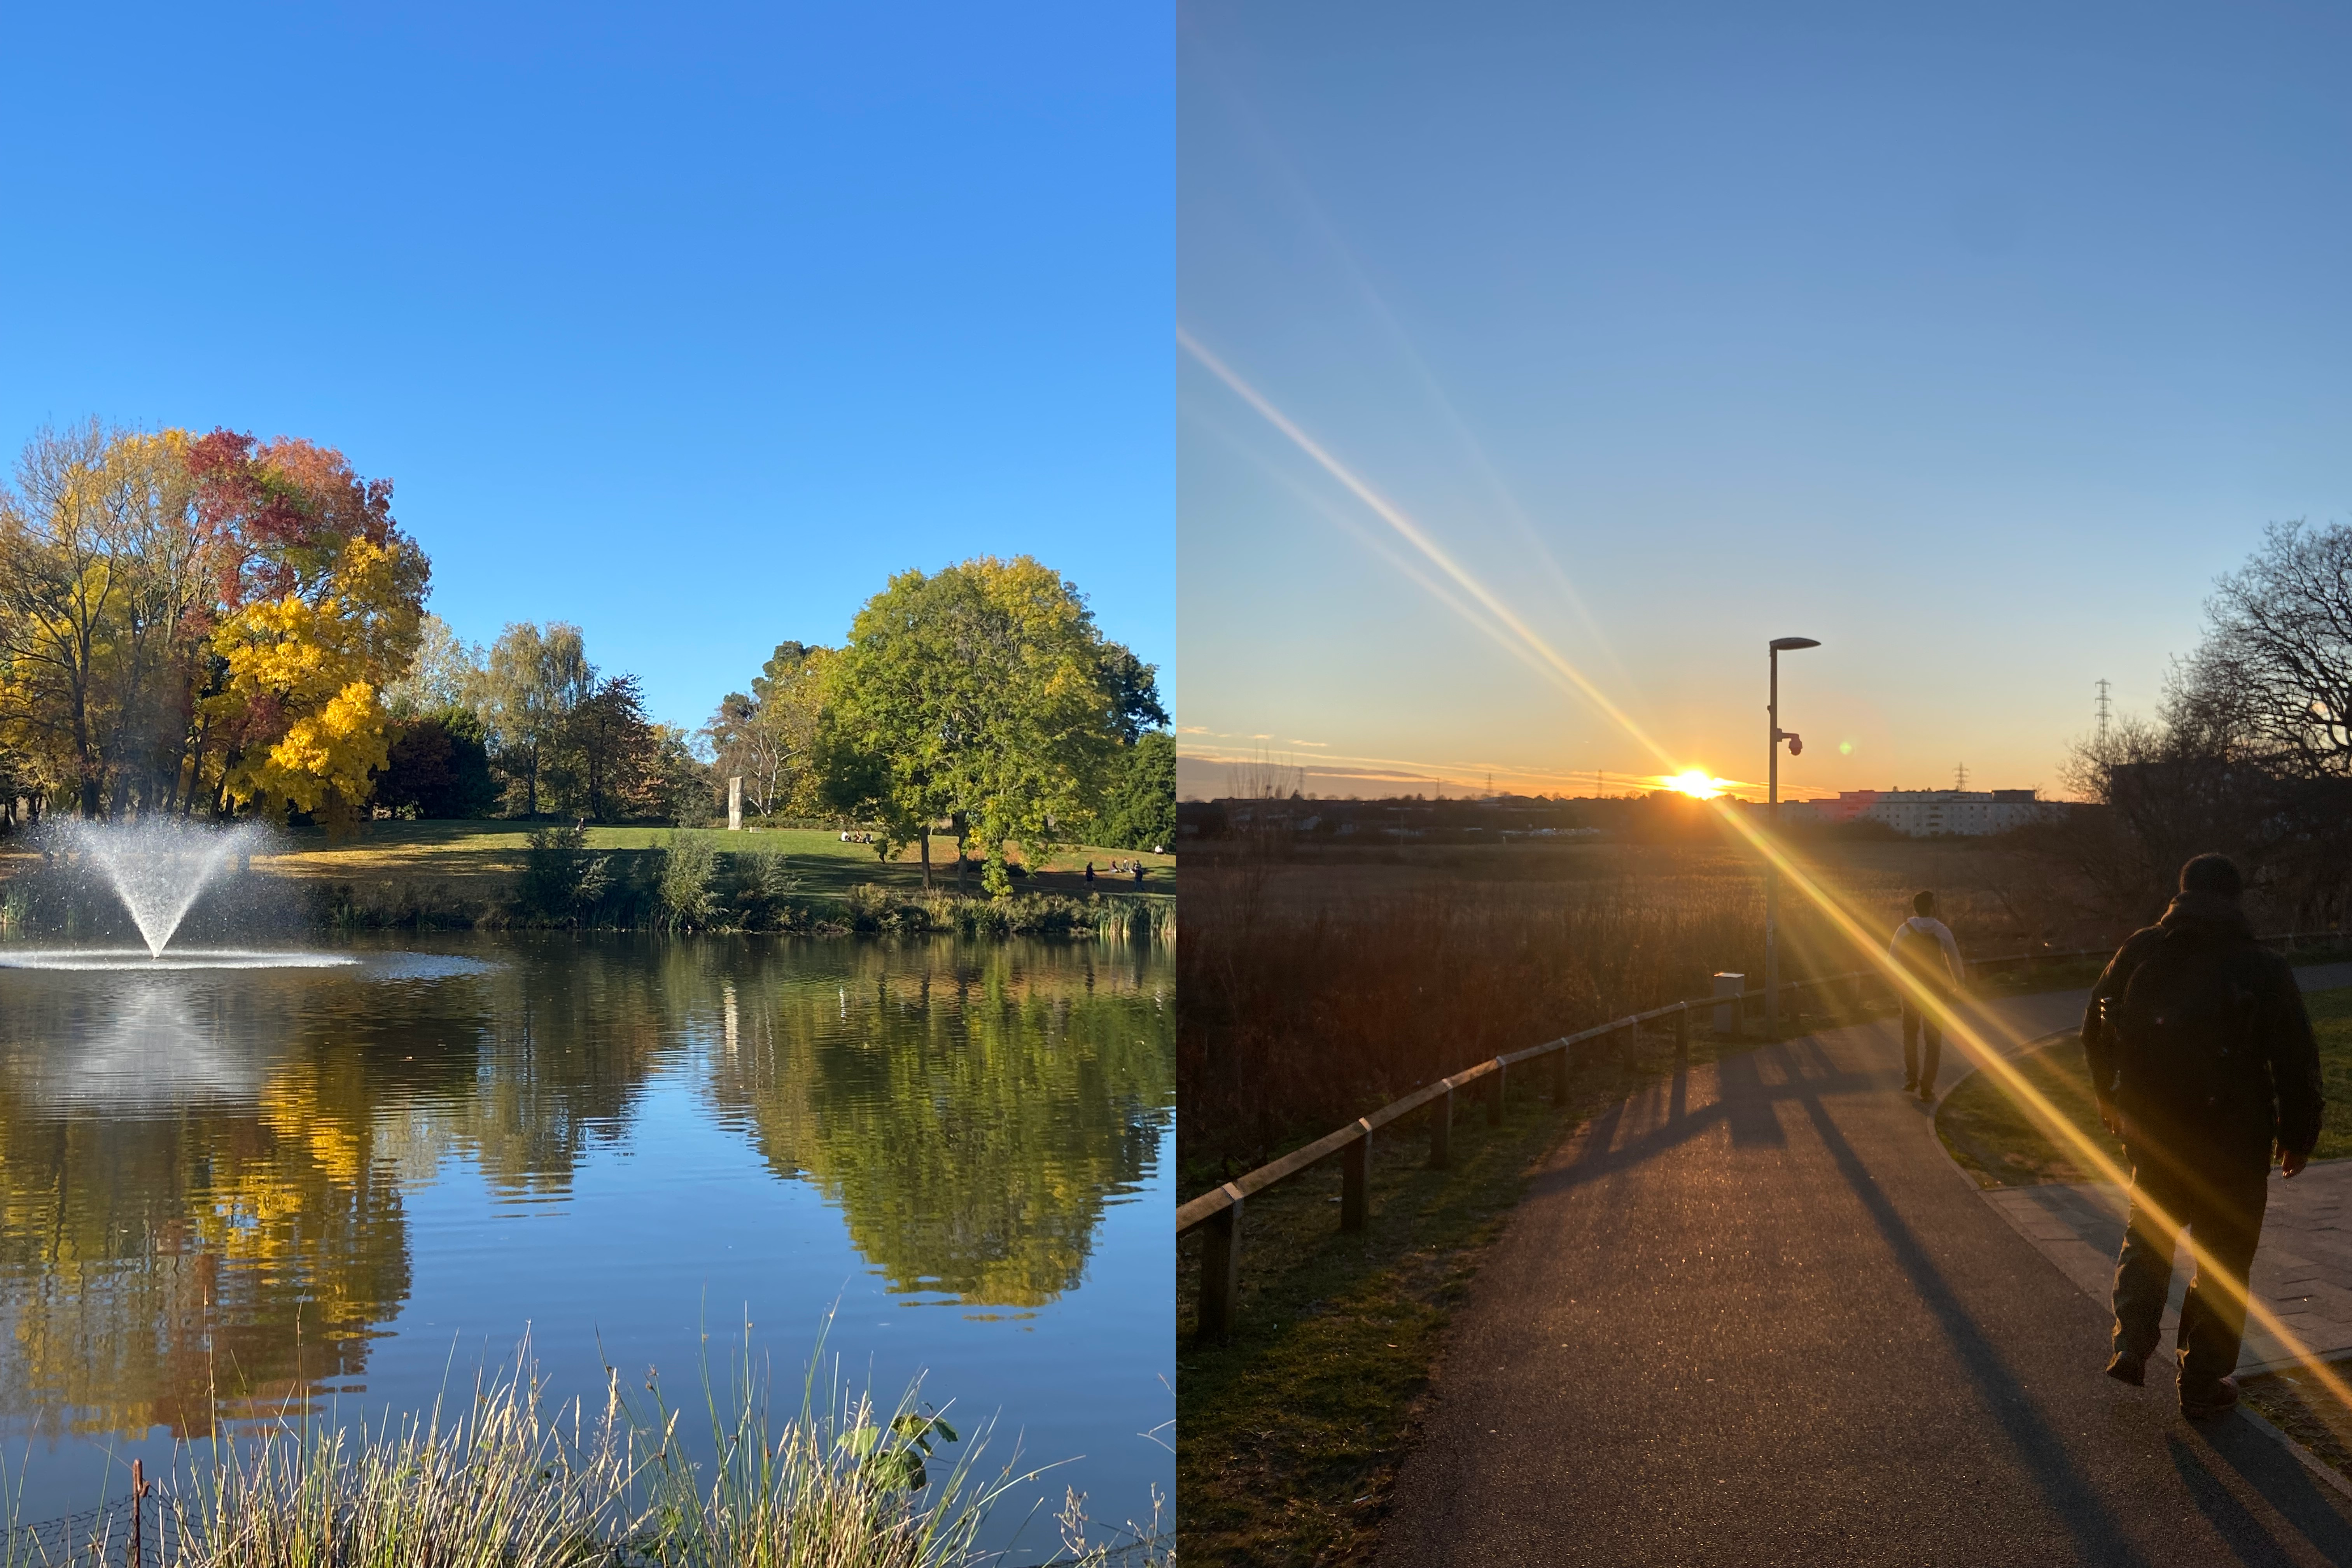 two images of Colchester camps - the lake and fountain with blue skies, and the sun setting